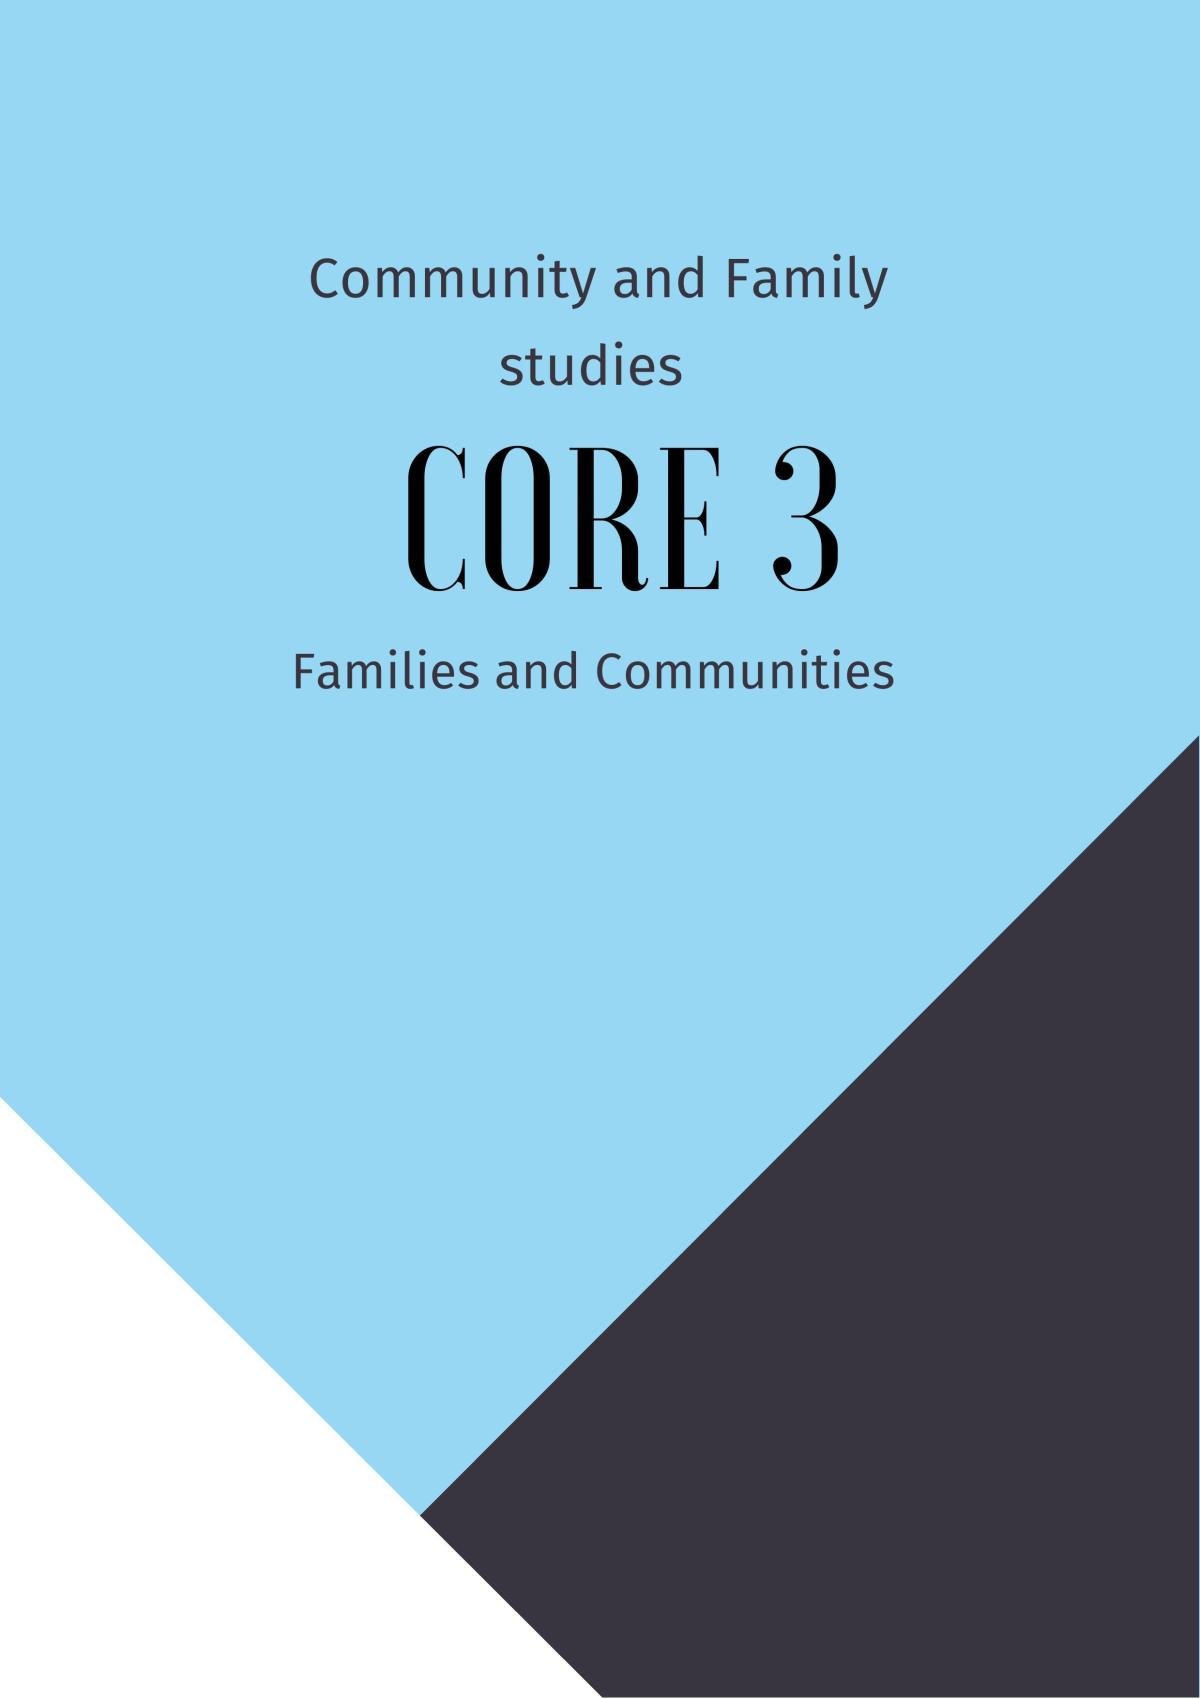 Core 3 for Community and Family Studies - Page 1